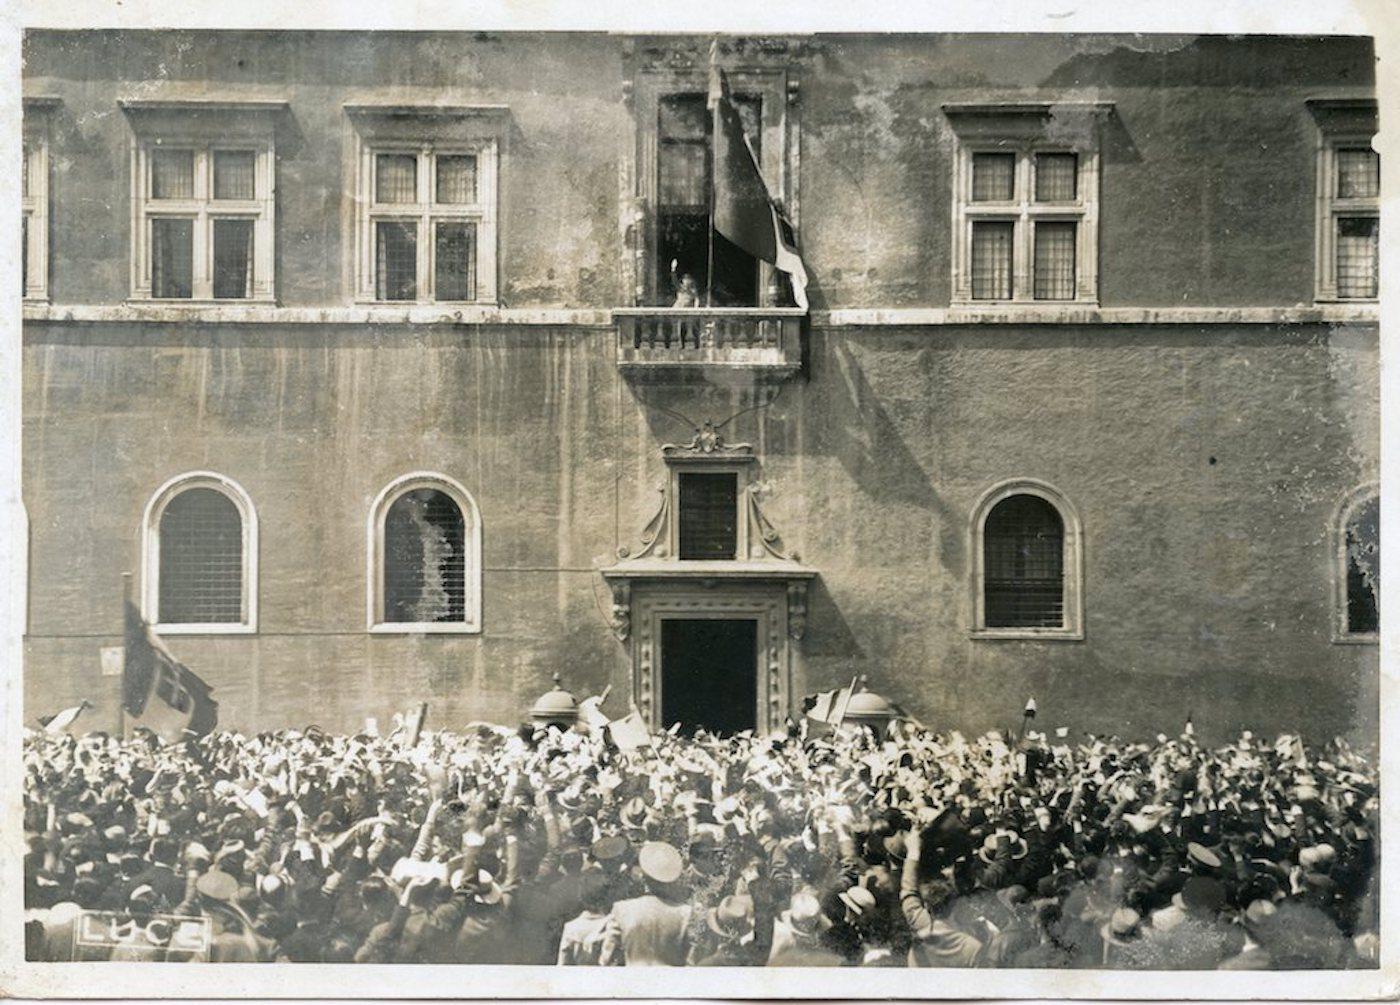 Unknown Black and White Photograph - Mussolini Greets The Crowd in Piazza Venezia - Vintage Photo 1936